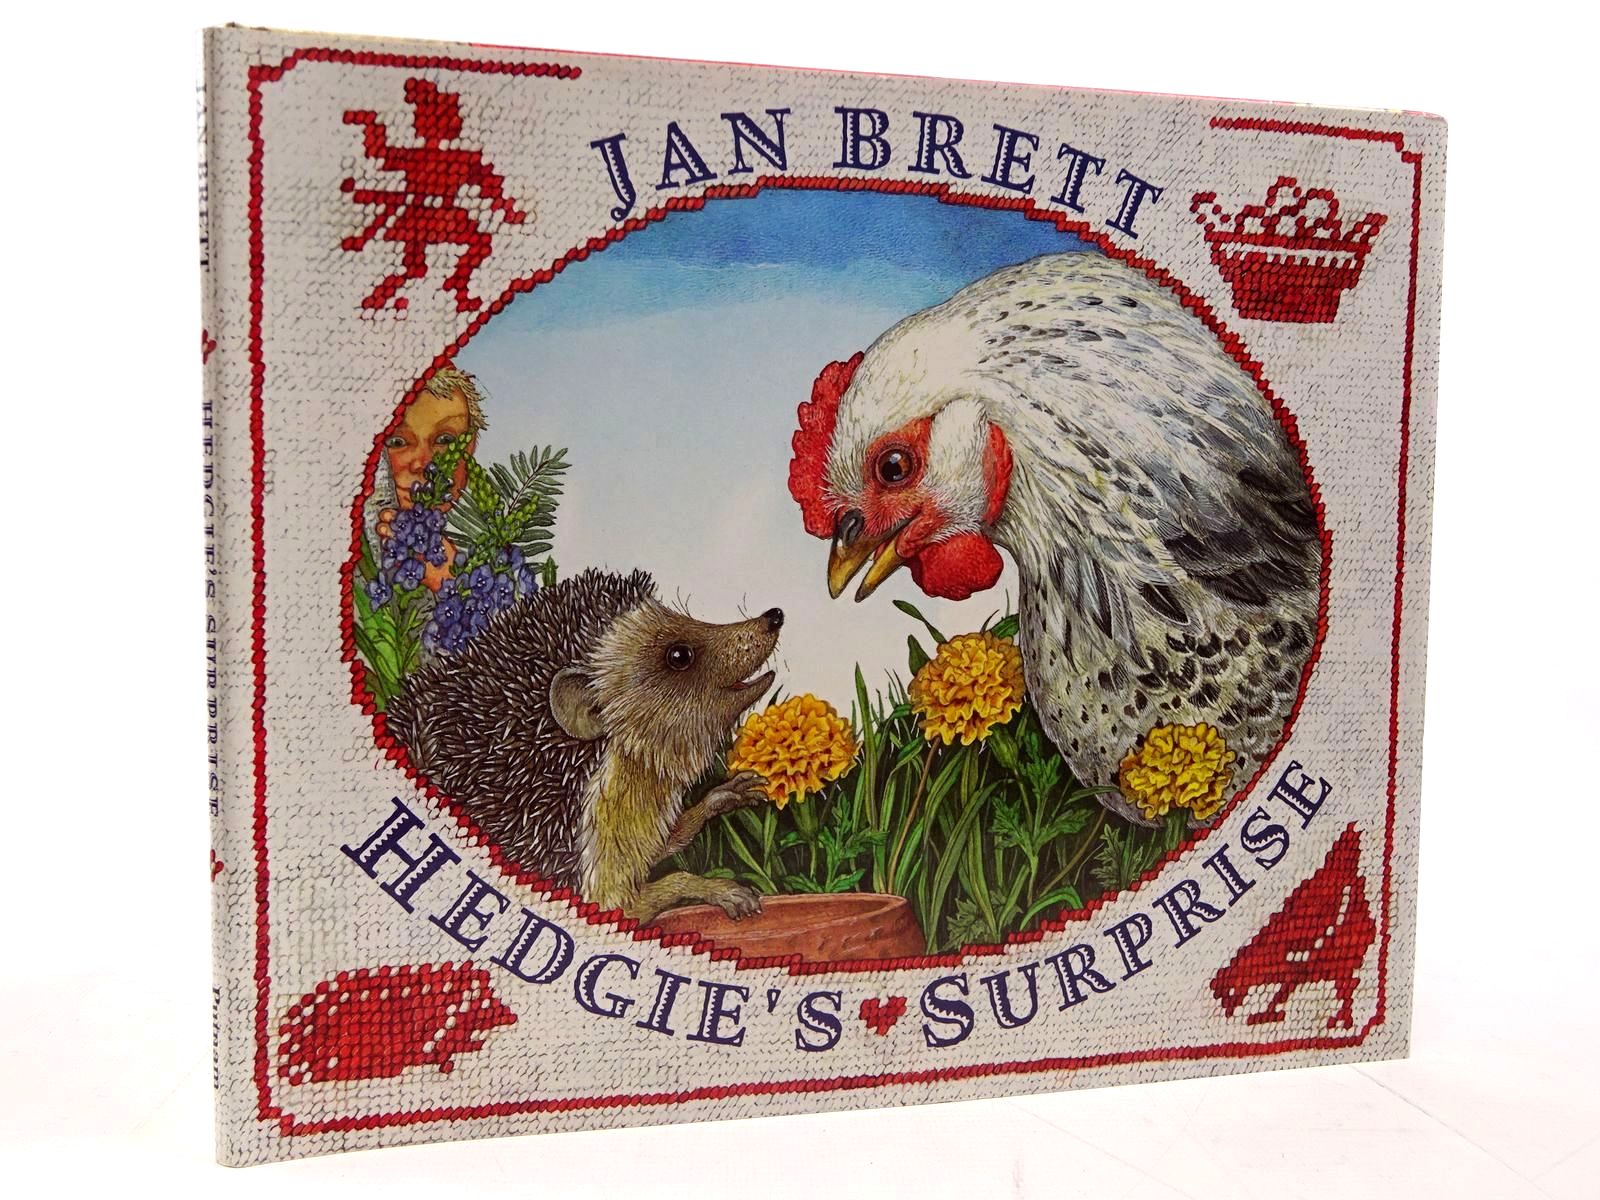 Photo of HEDGIE'S SURPRISE written by Brett, Jan illustrated by Brett, Jan published by G.P. Putnam's Sons (STOCK CODE: 2130800)  for sale by Stella & Rose's Books